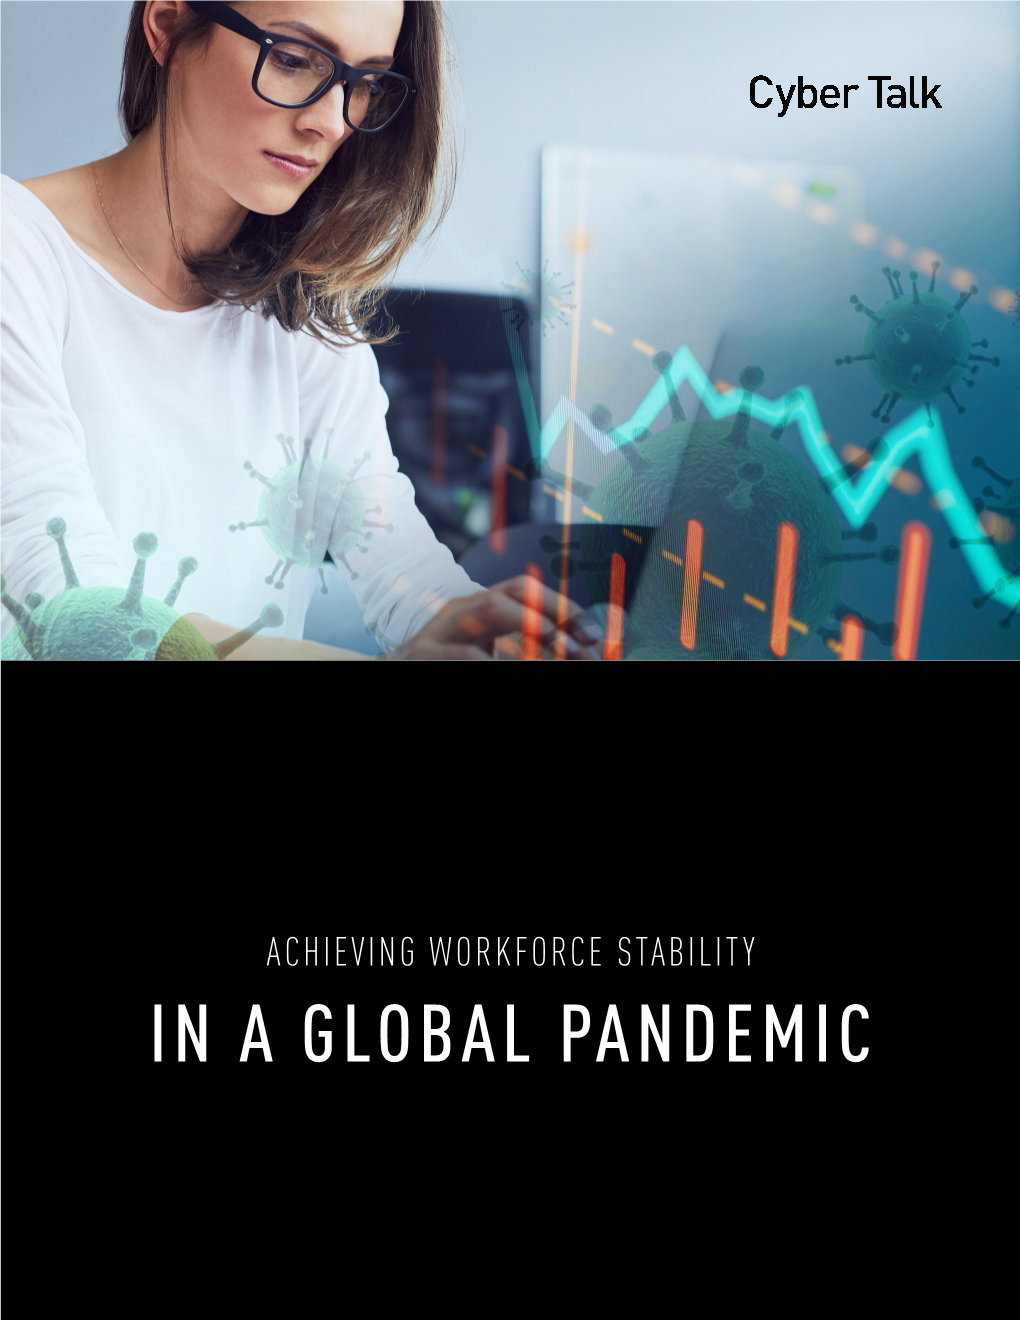 16. Achieving Workforce Stability in a Global Pandemic